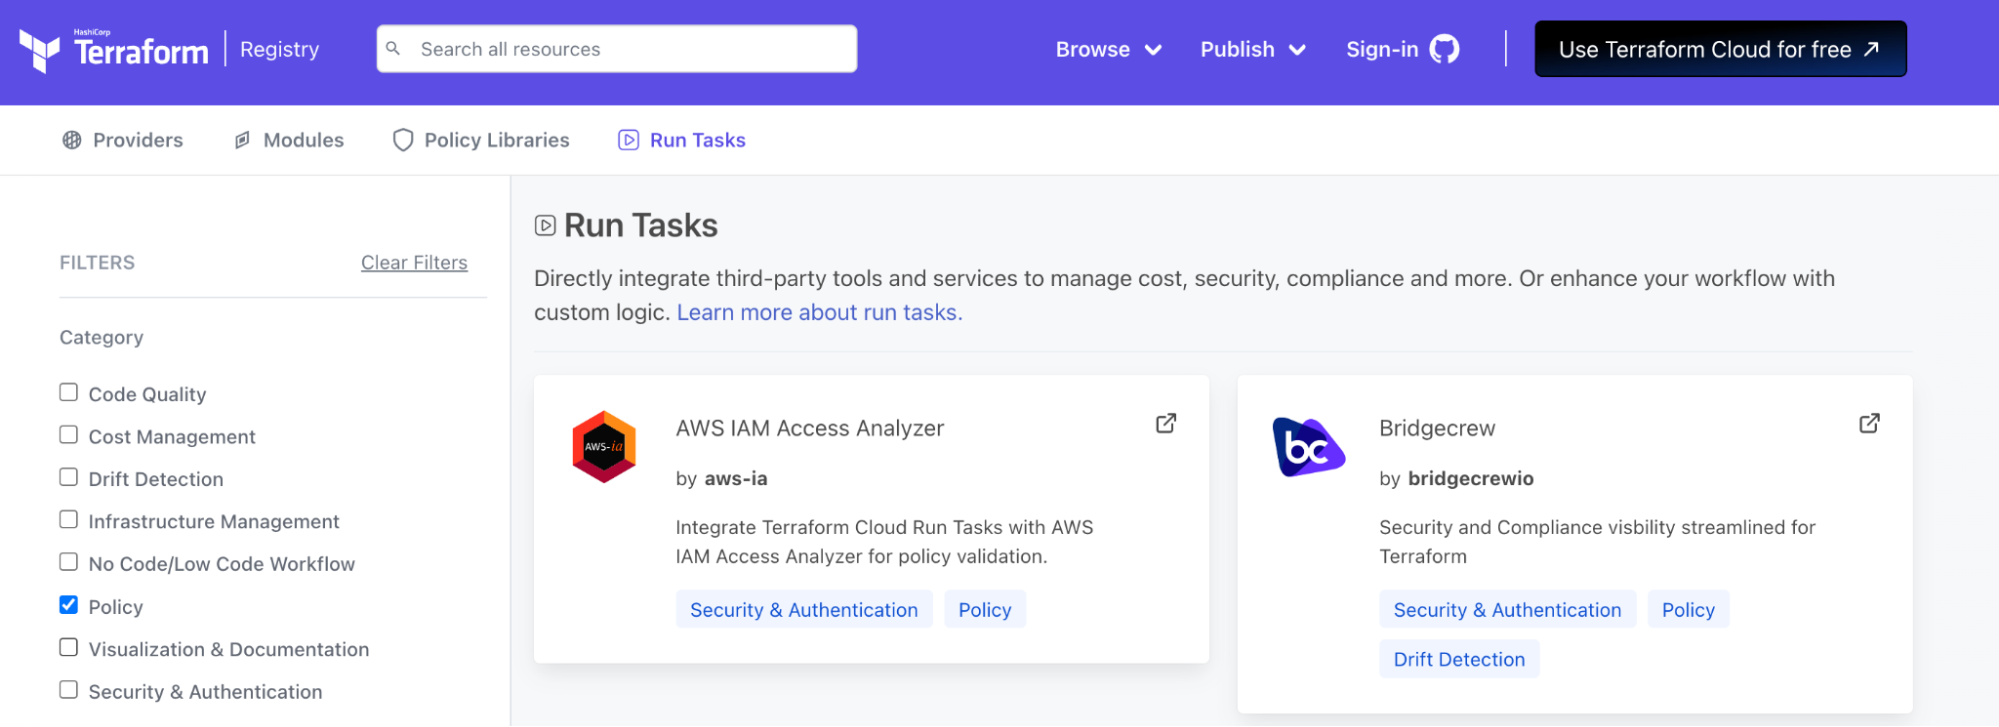 A new AWS IAM Access Analyzer run task has now been published as a Terraform module and an AWS run task in the Terraform Registry.